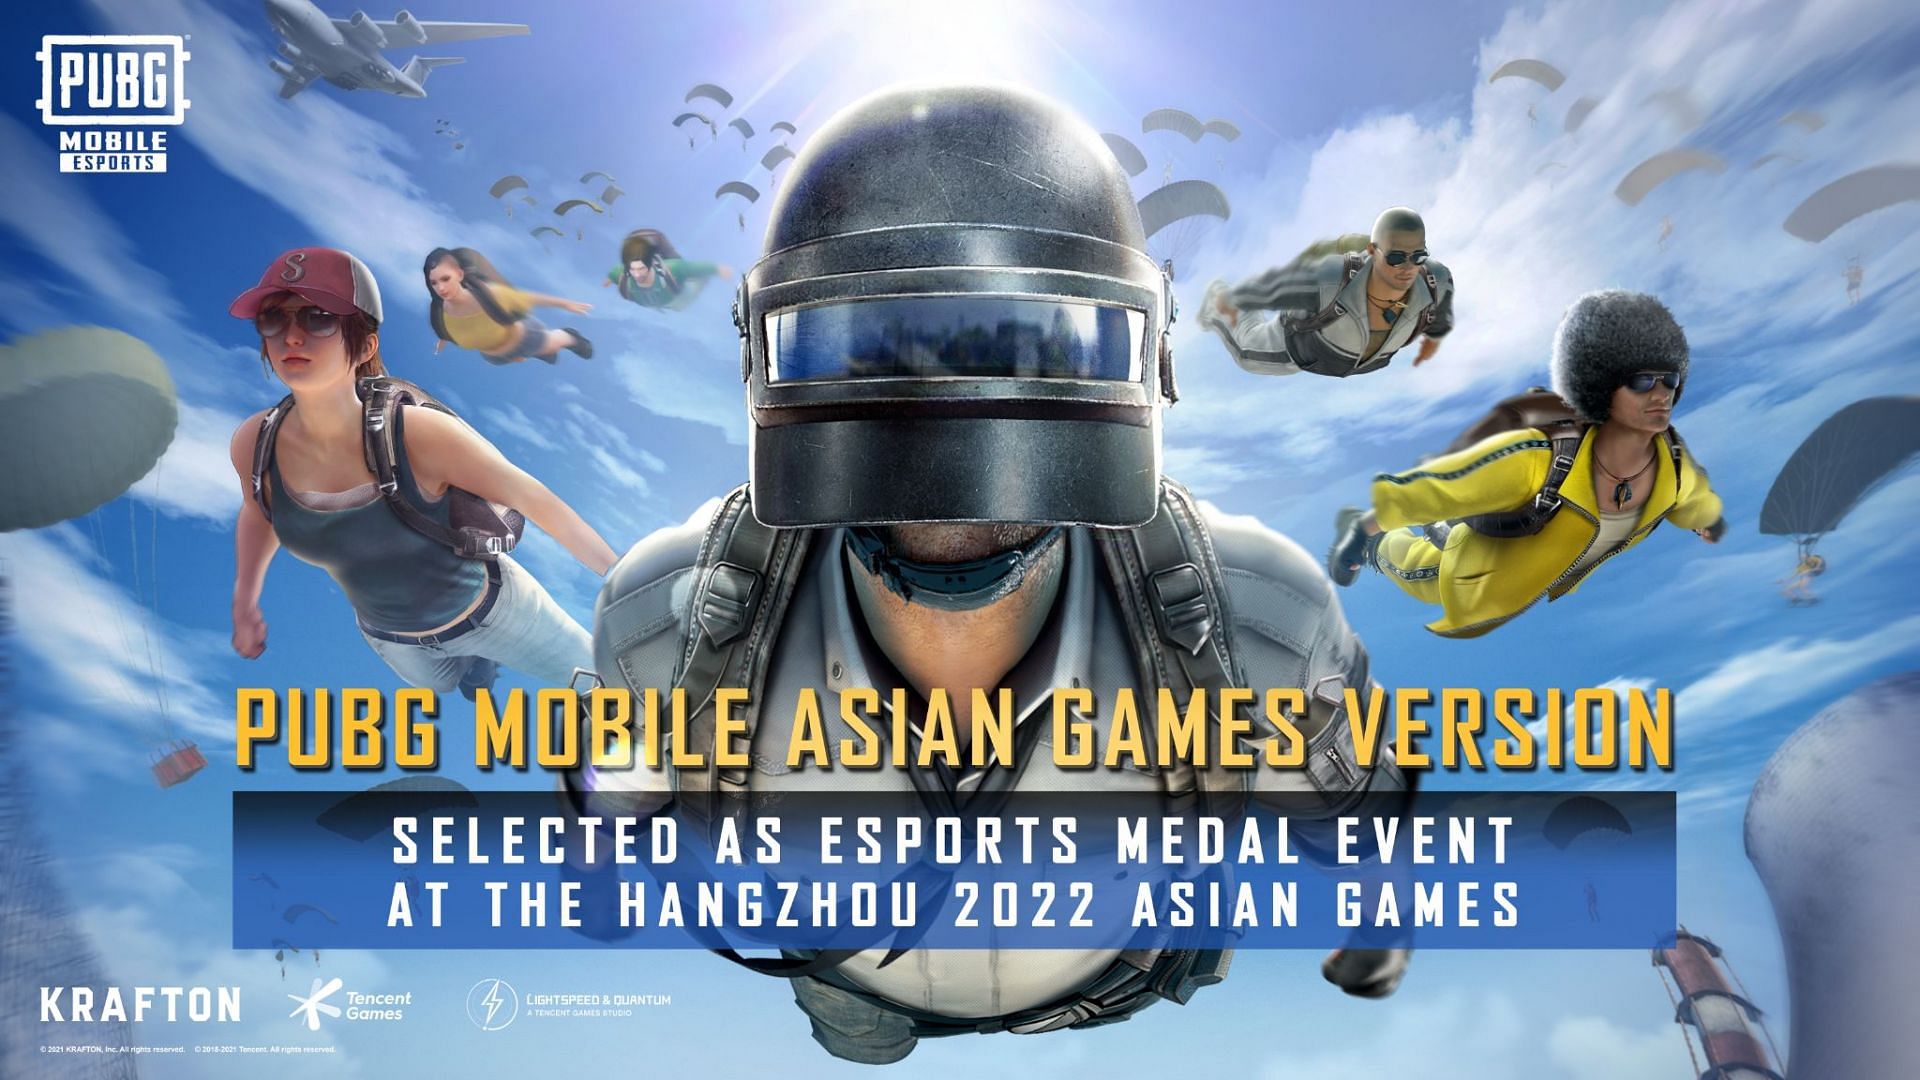 PUBG Mobile announced as medalled event at the 2022 Asian Games (Image via Krafton)